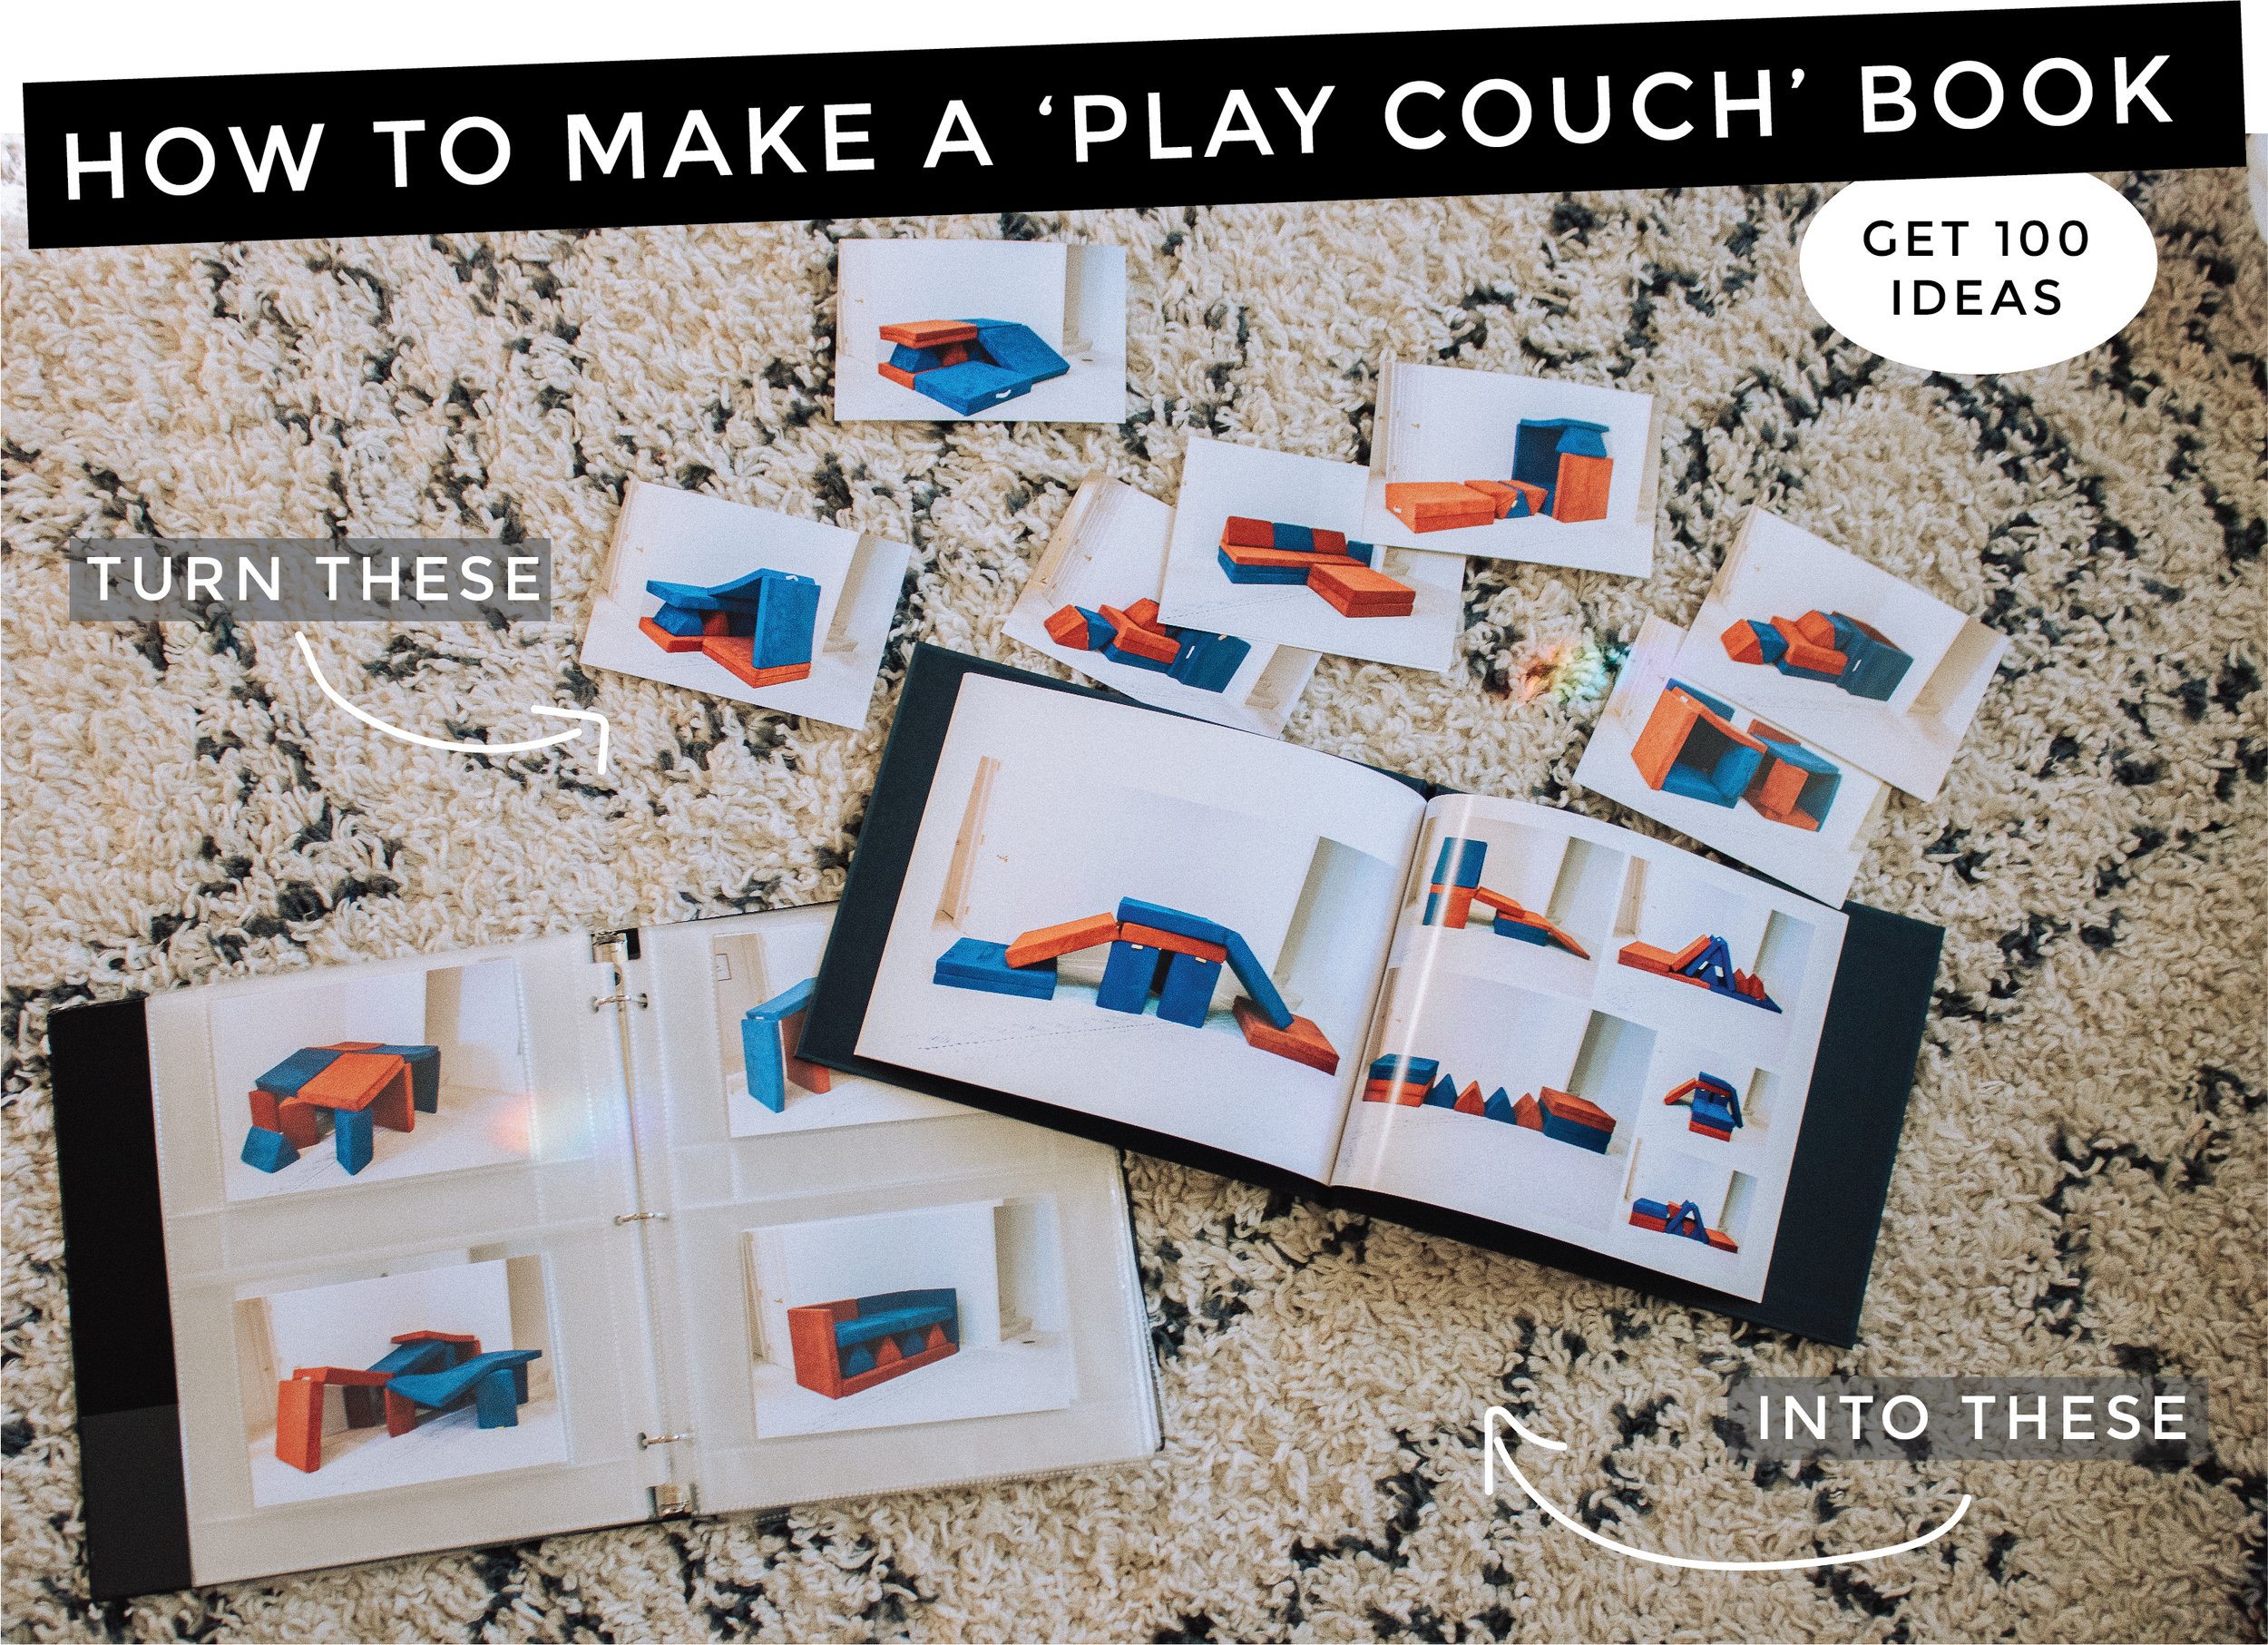 Nugget Obstacle Course Ideas  Single nugget couch configurations